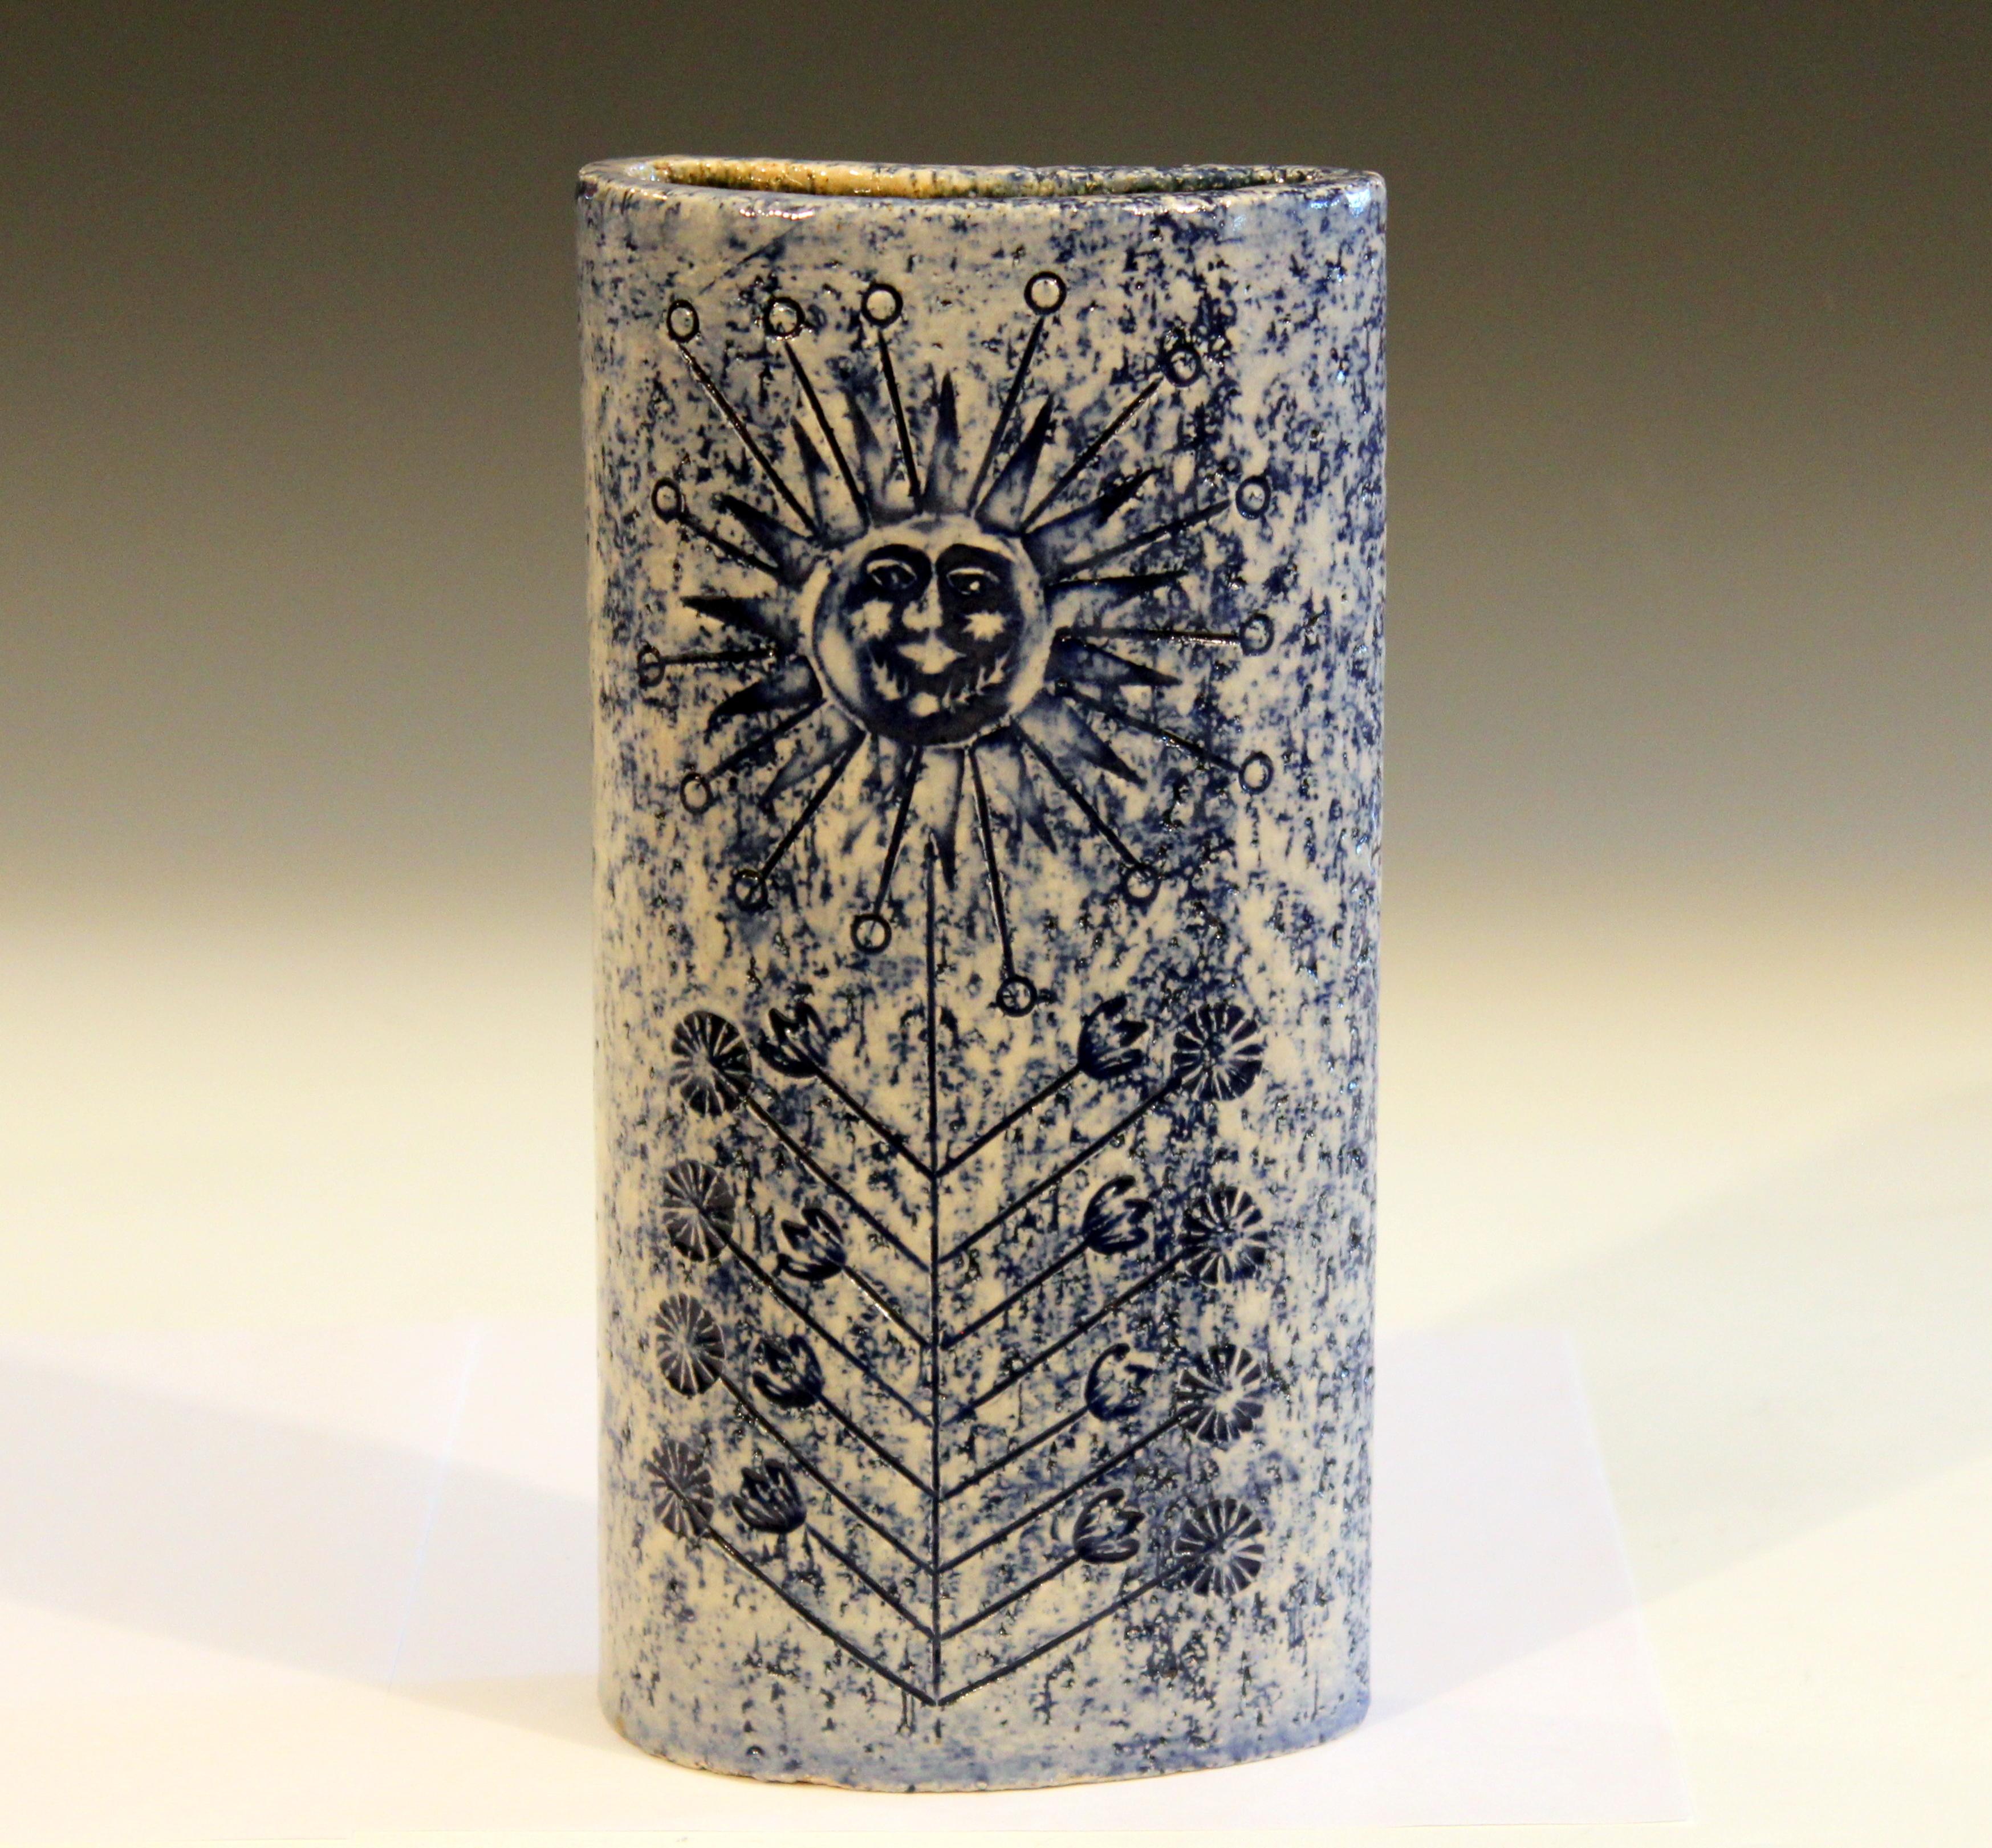 Vintage Roger Capron flower vase with impressed sun face design and attractive blue glaze from the studio in Vallauris, circa 1950s. Measures: 10